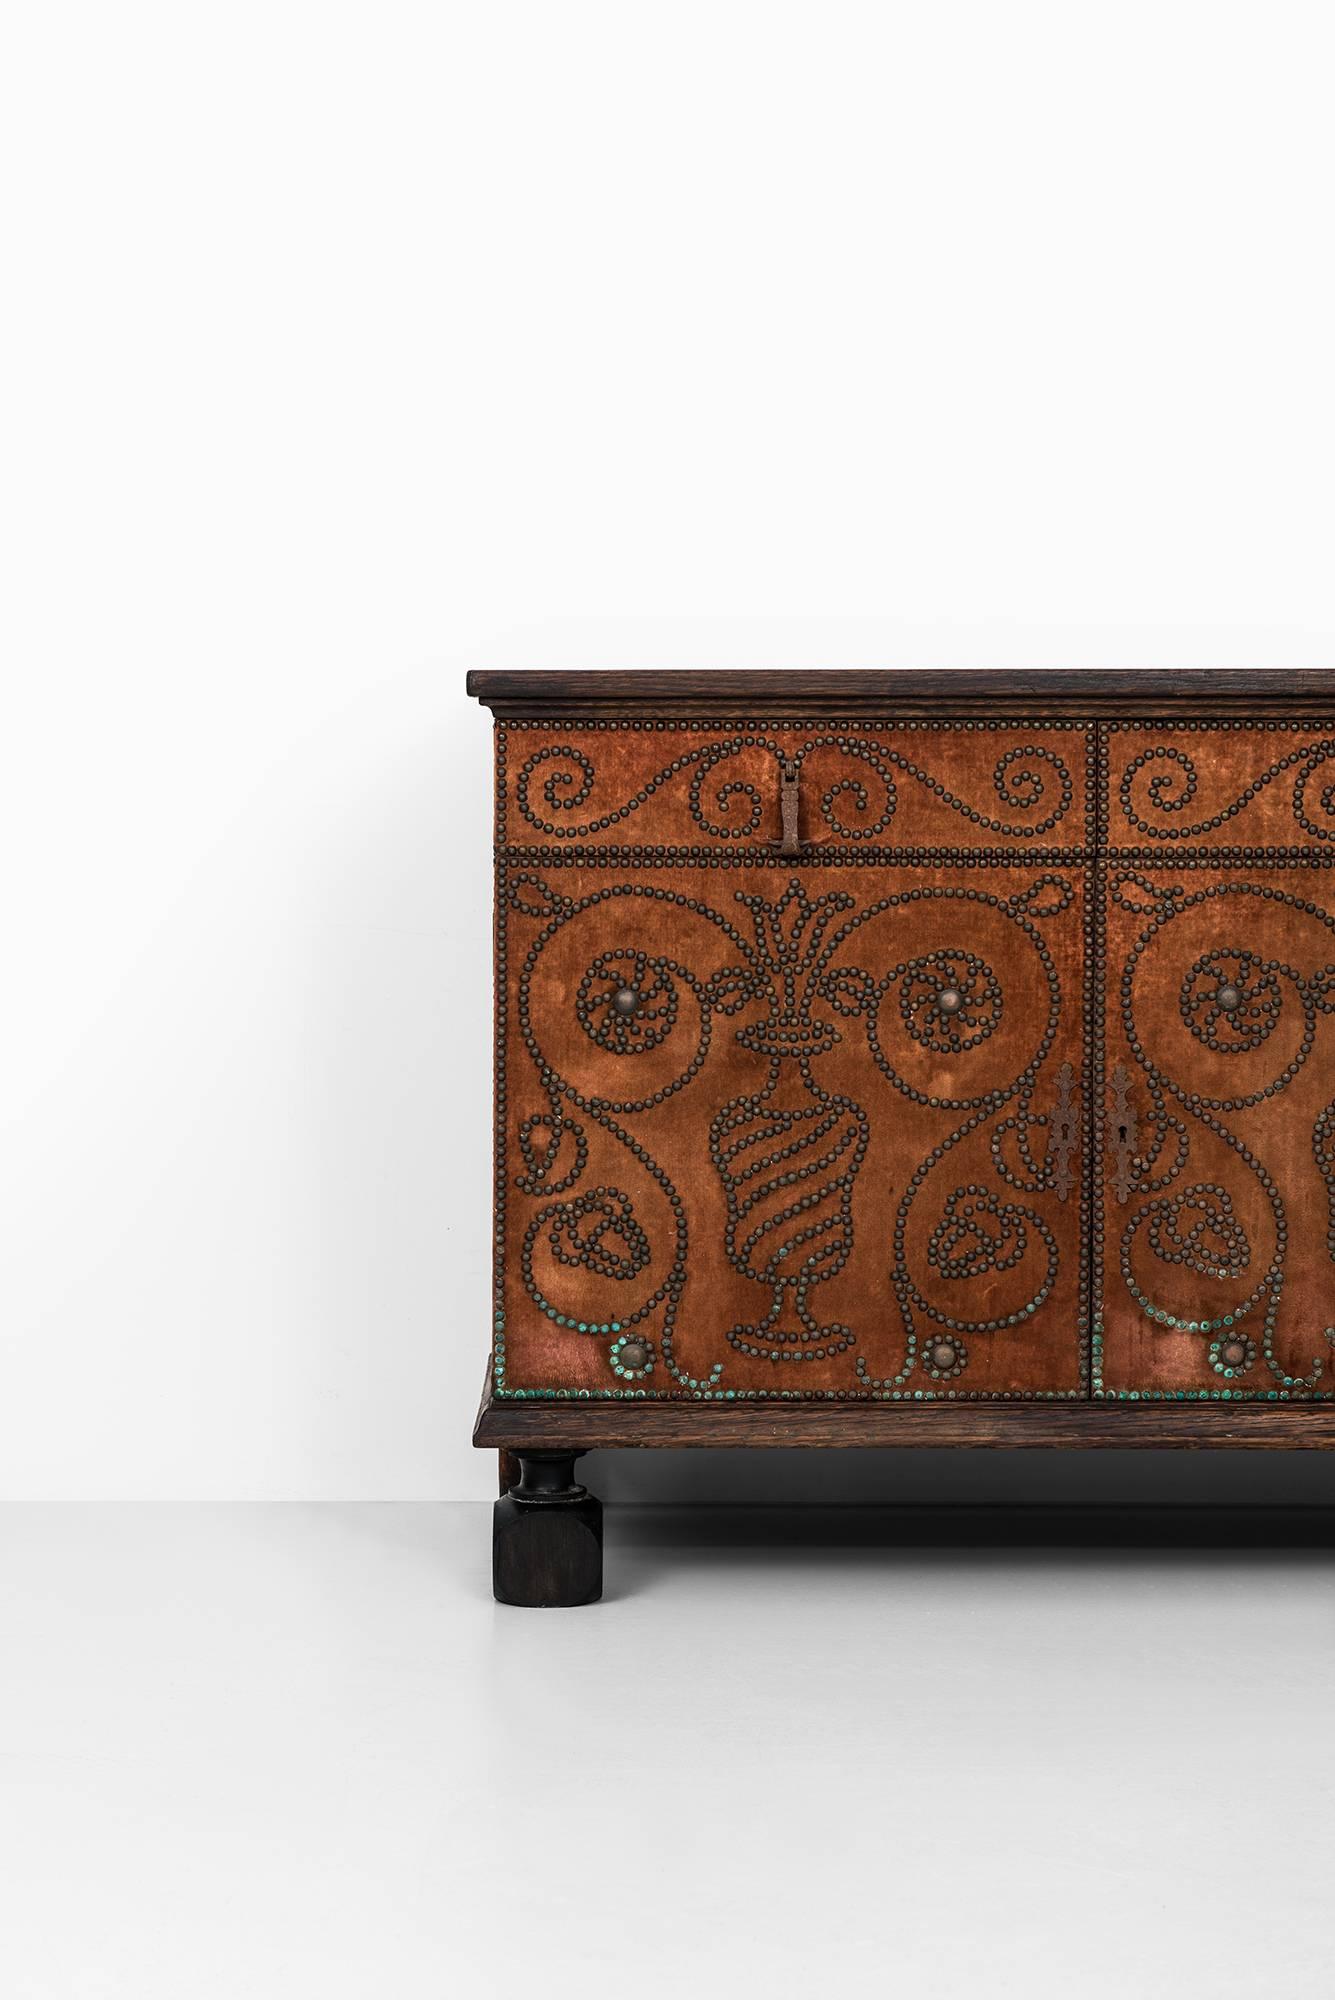 Rare bopoint cabinet attributed to Otto Schulz. Probably produced by Boet in Sweden.